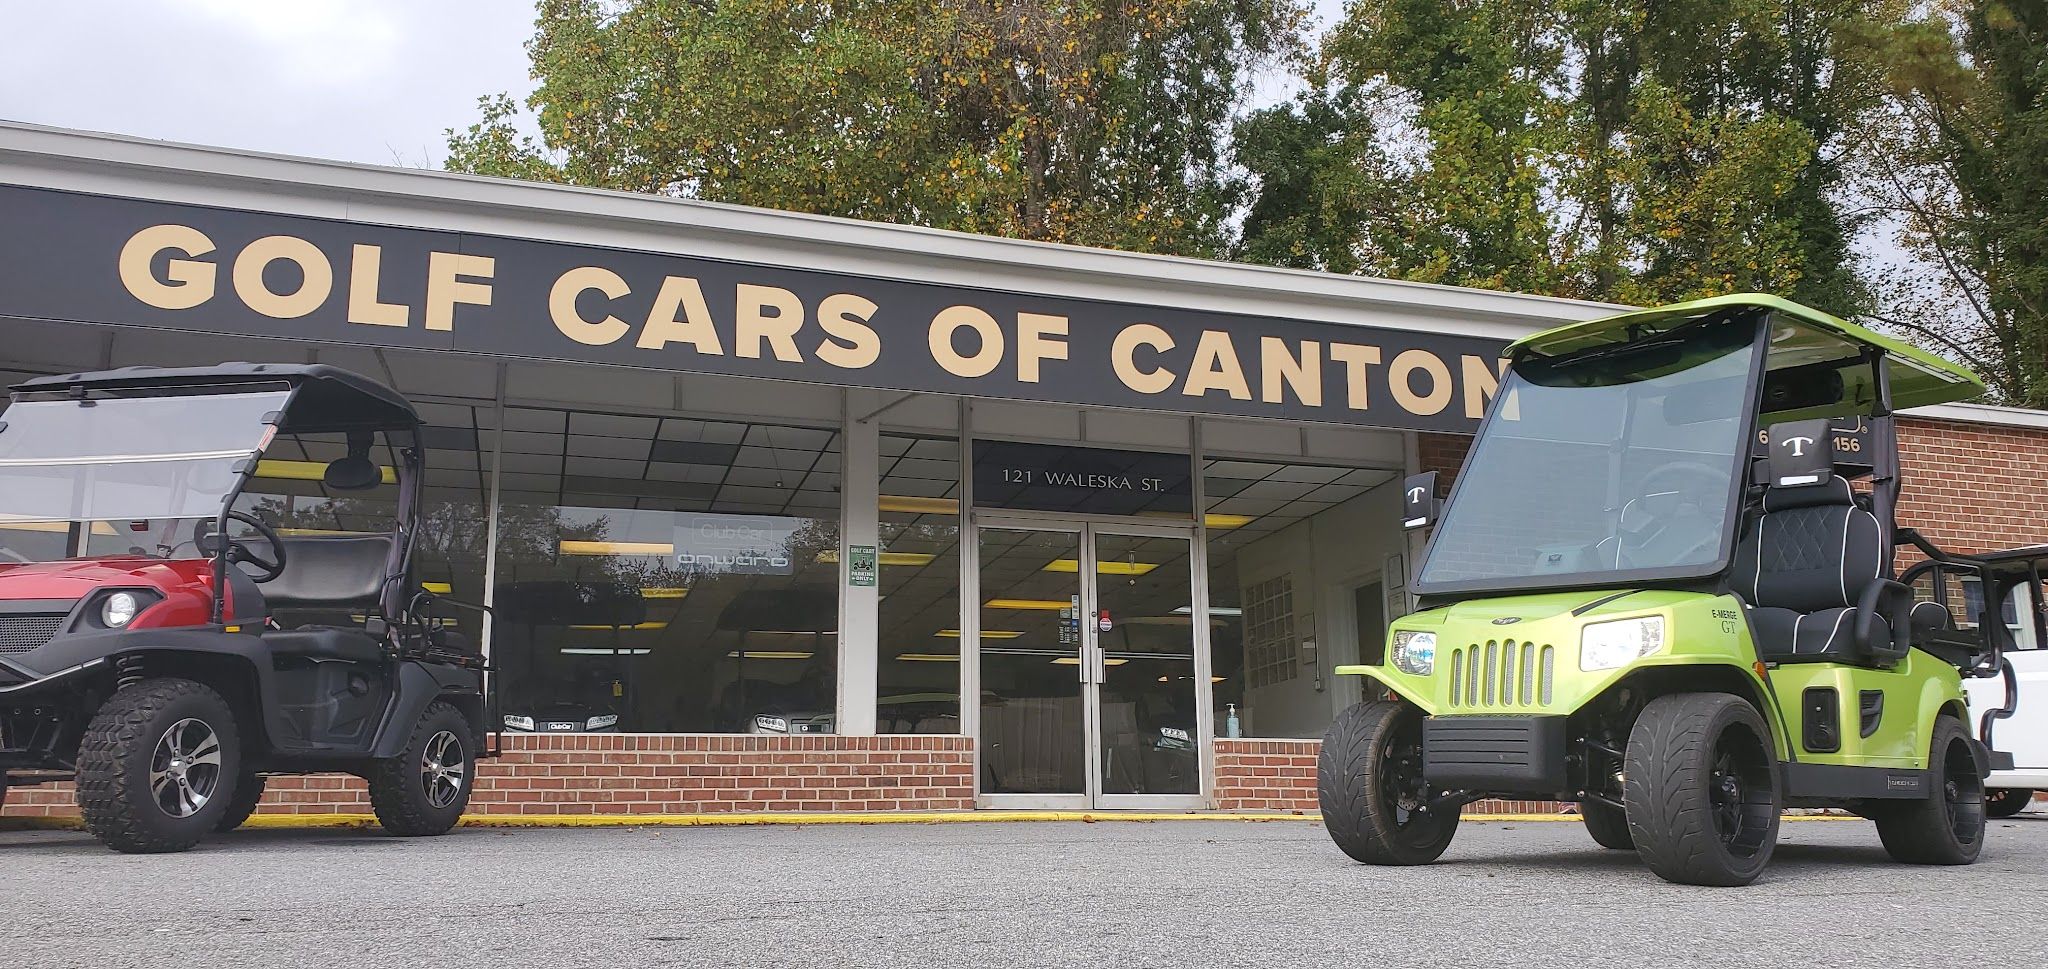 Services & Products Golf Cars of Canton in Canton GA